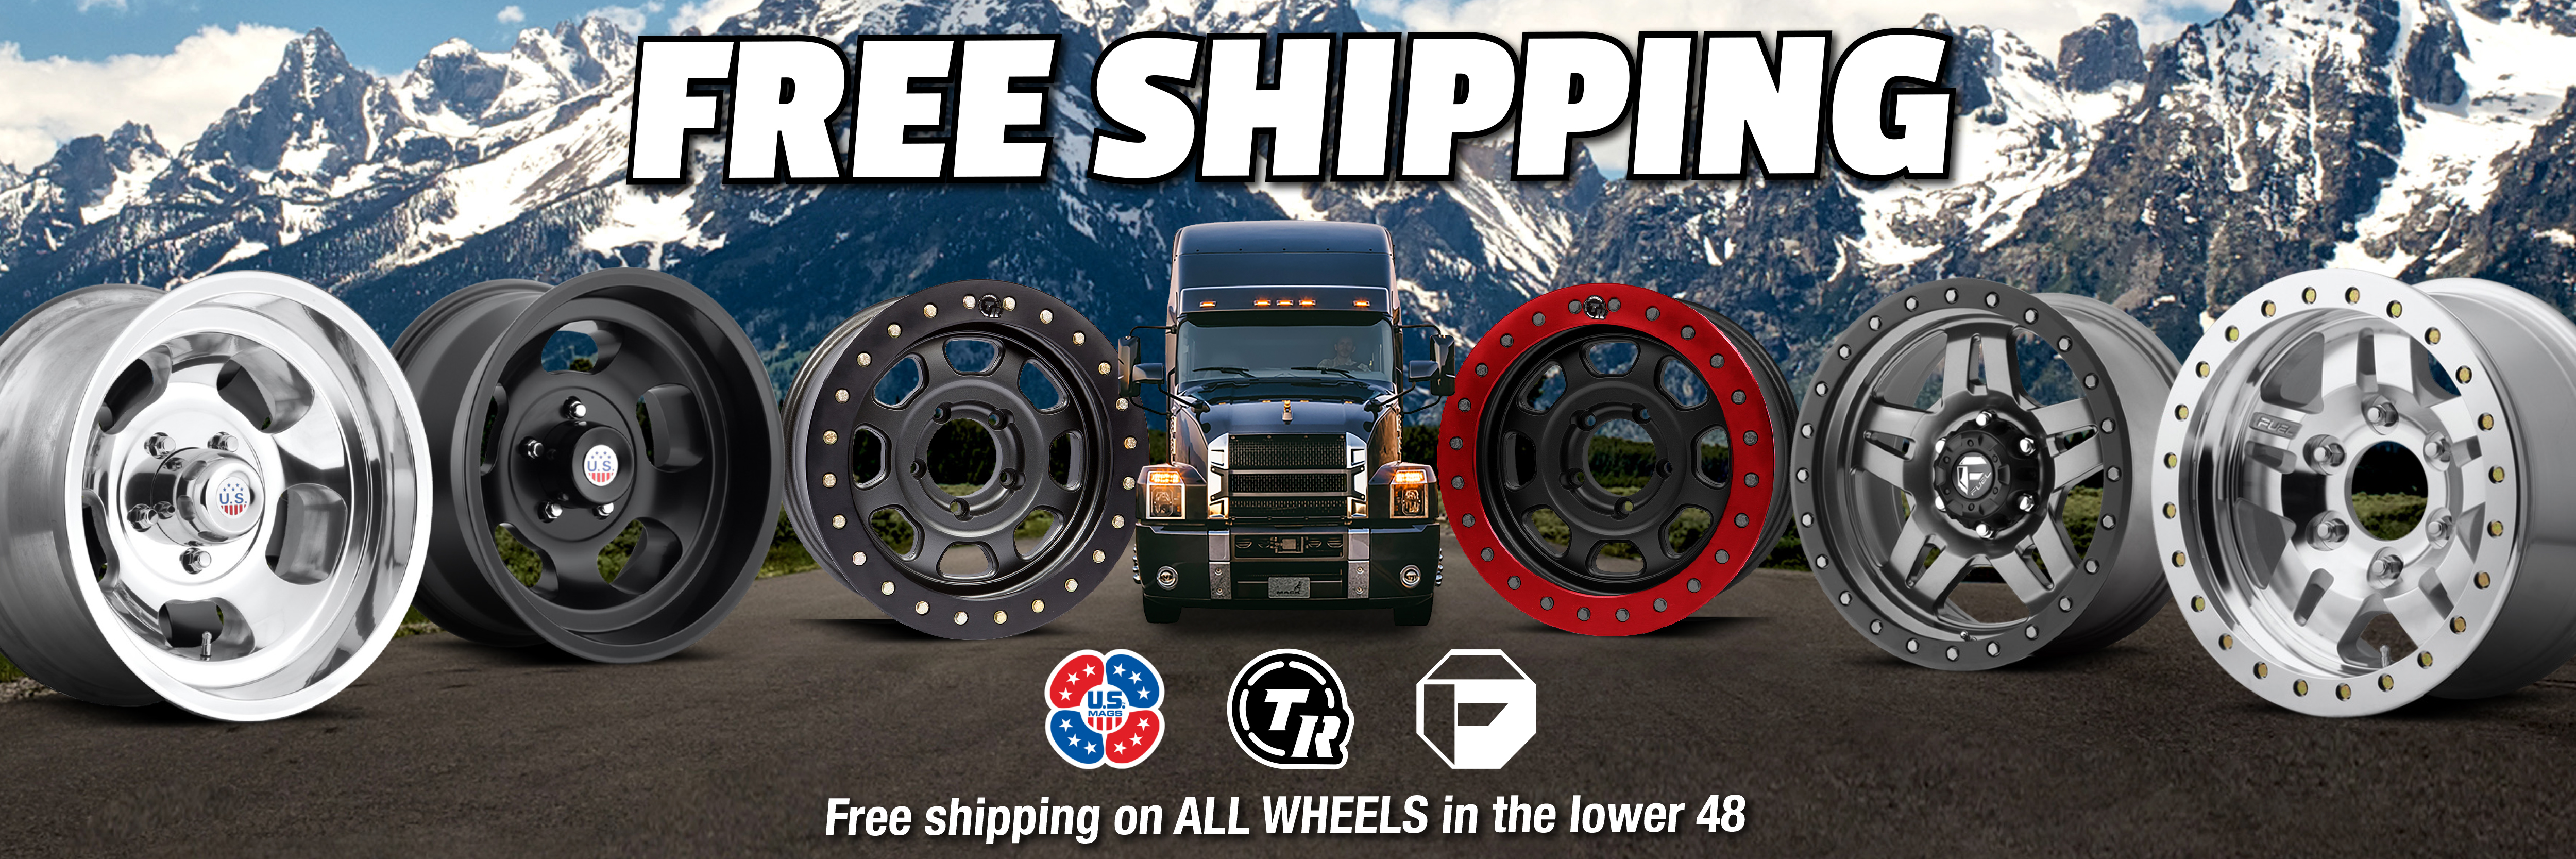 FREE Shipping on ALL Wheels